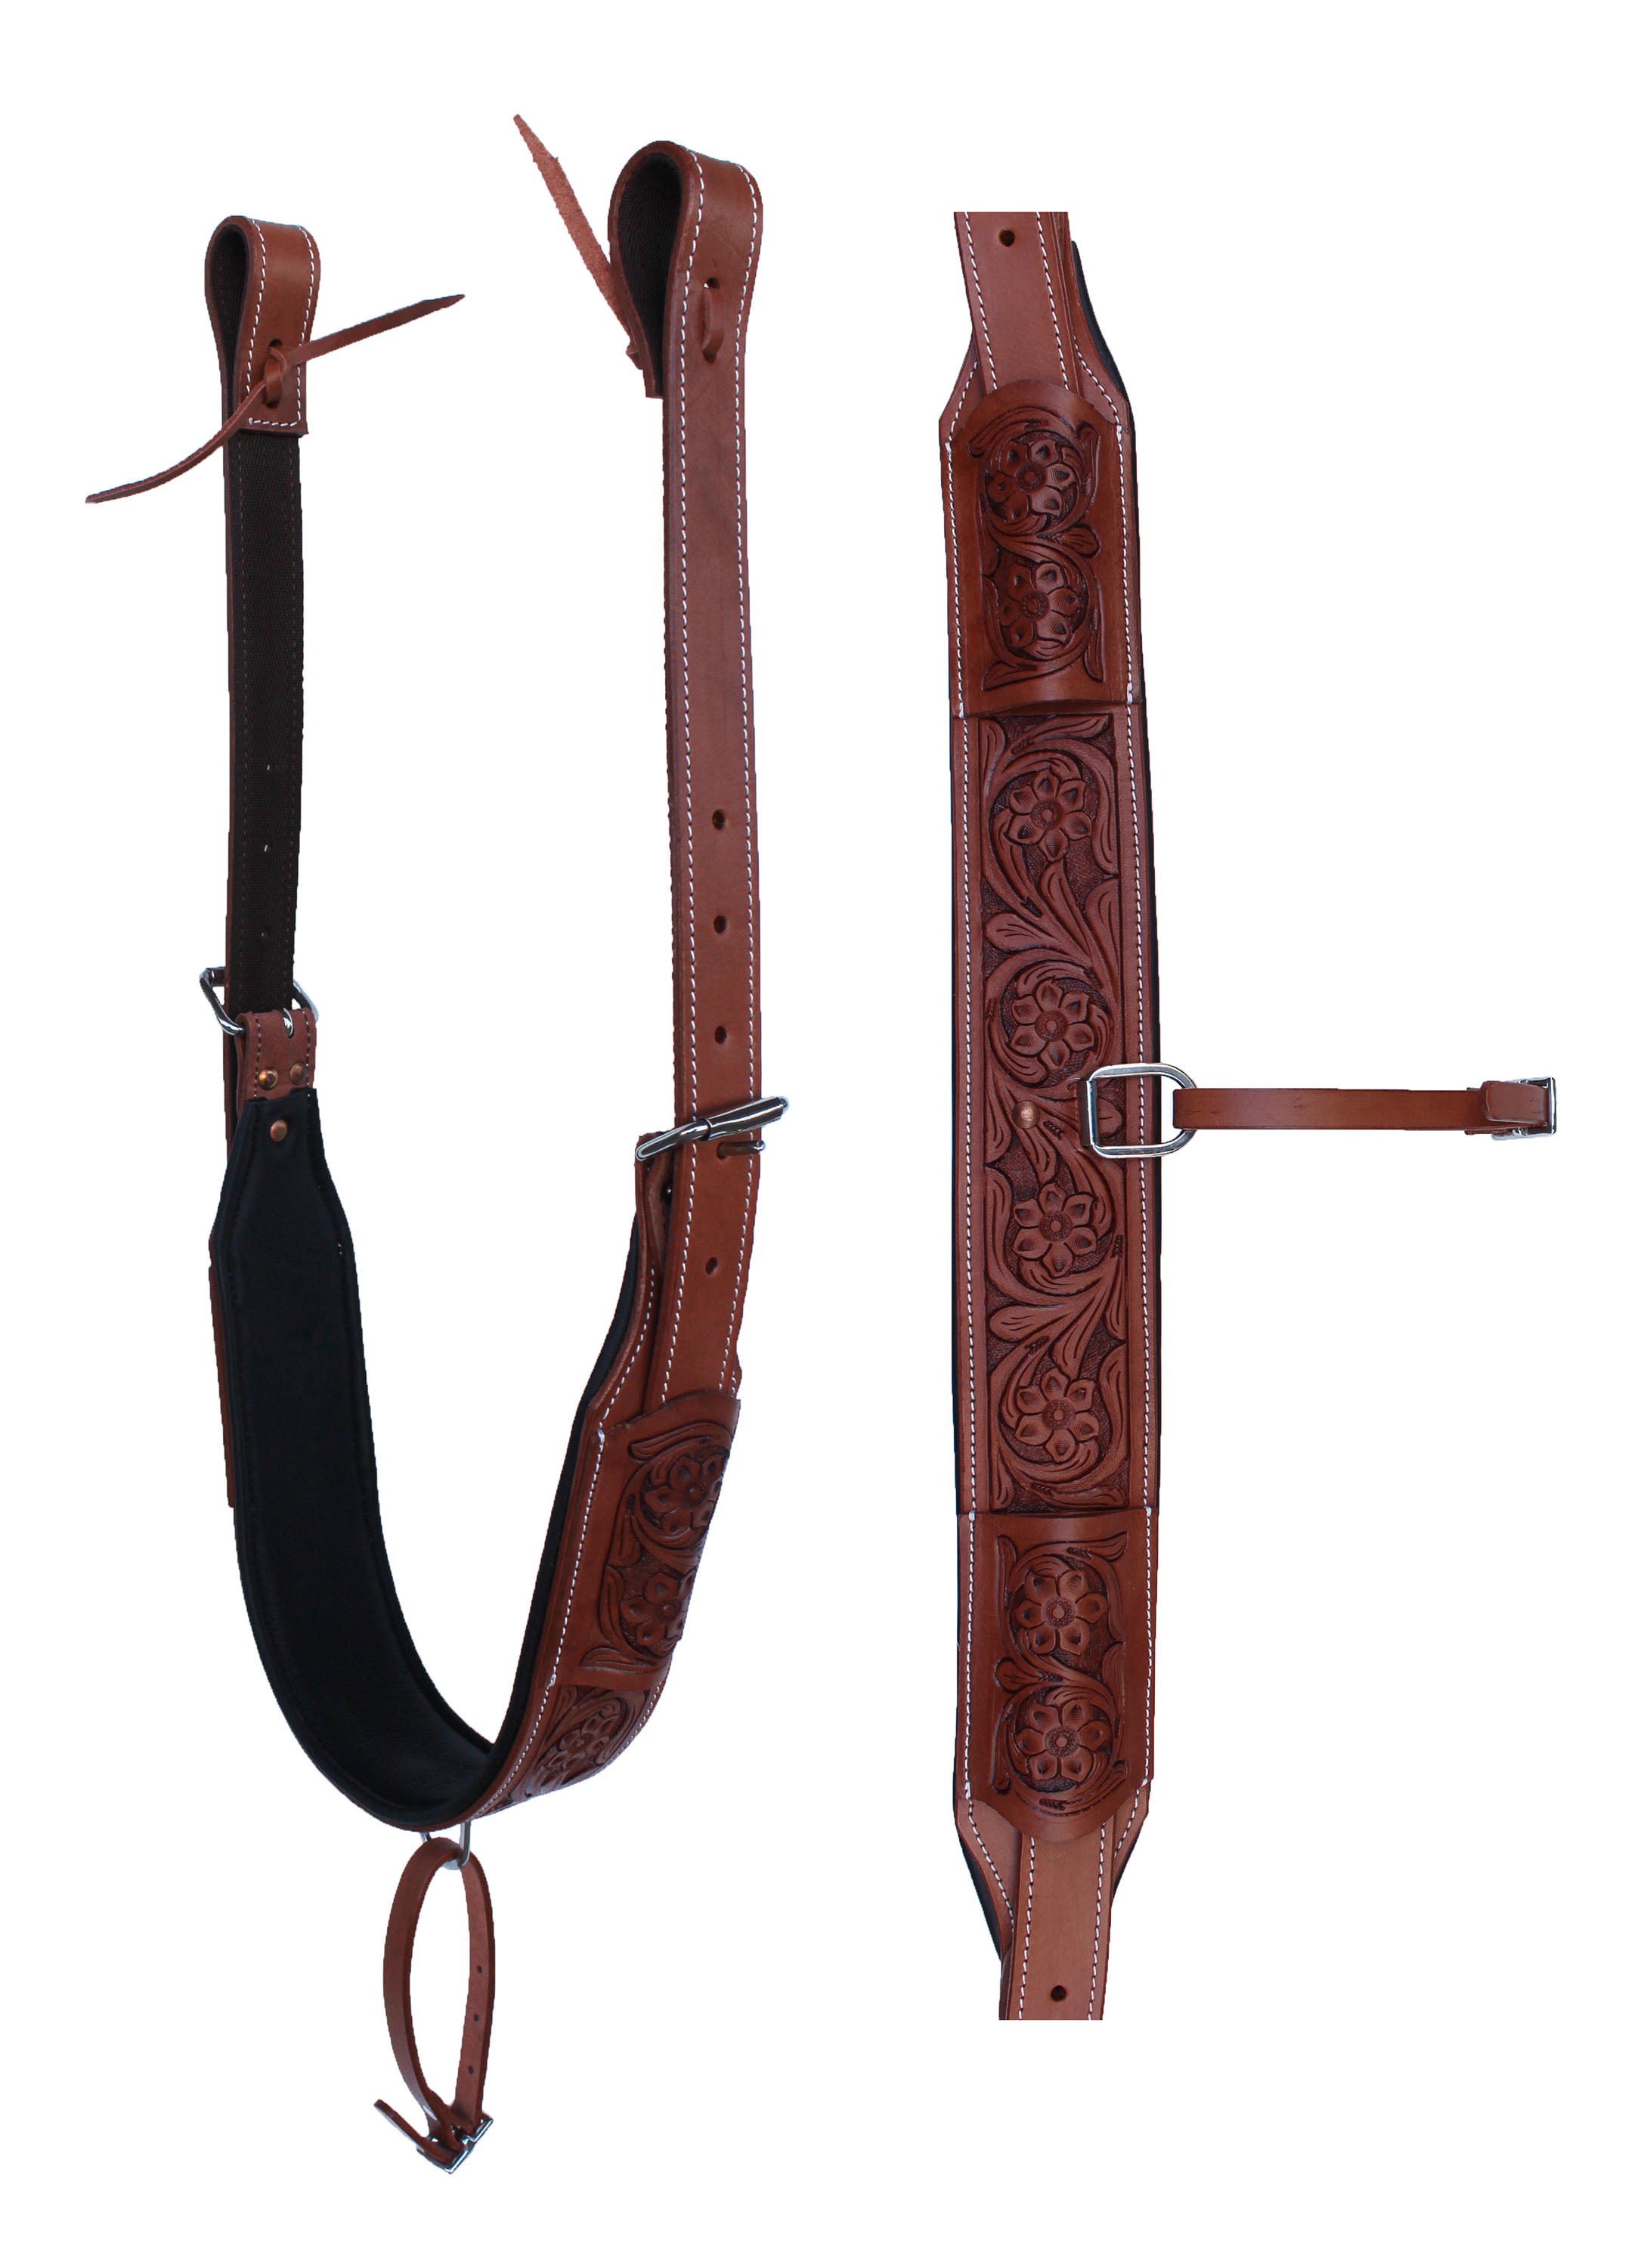 USED FLORAL TOOLED LEATHER BACK REAR CINCH FLANK BILLET WESTERN HORSE GIRTH TACK 